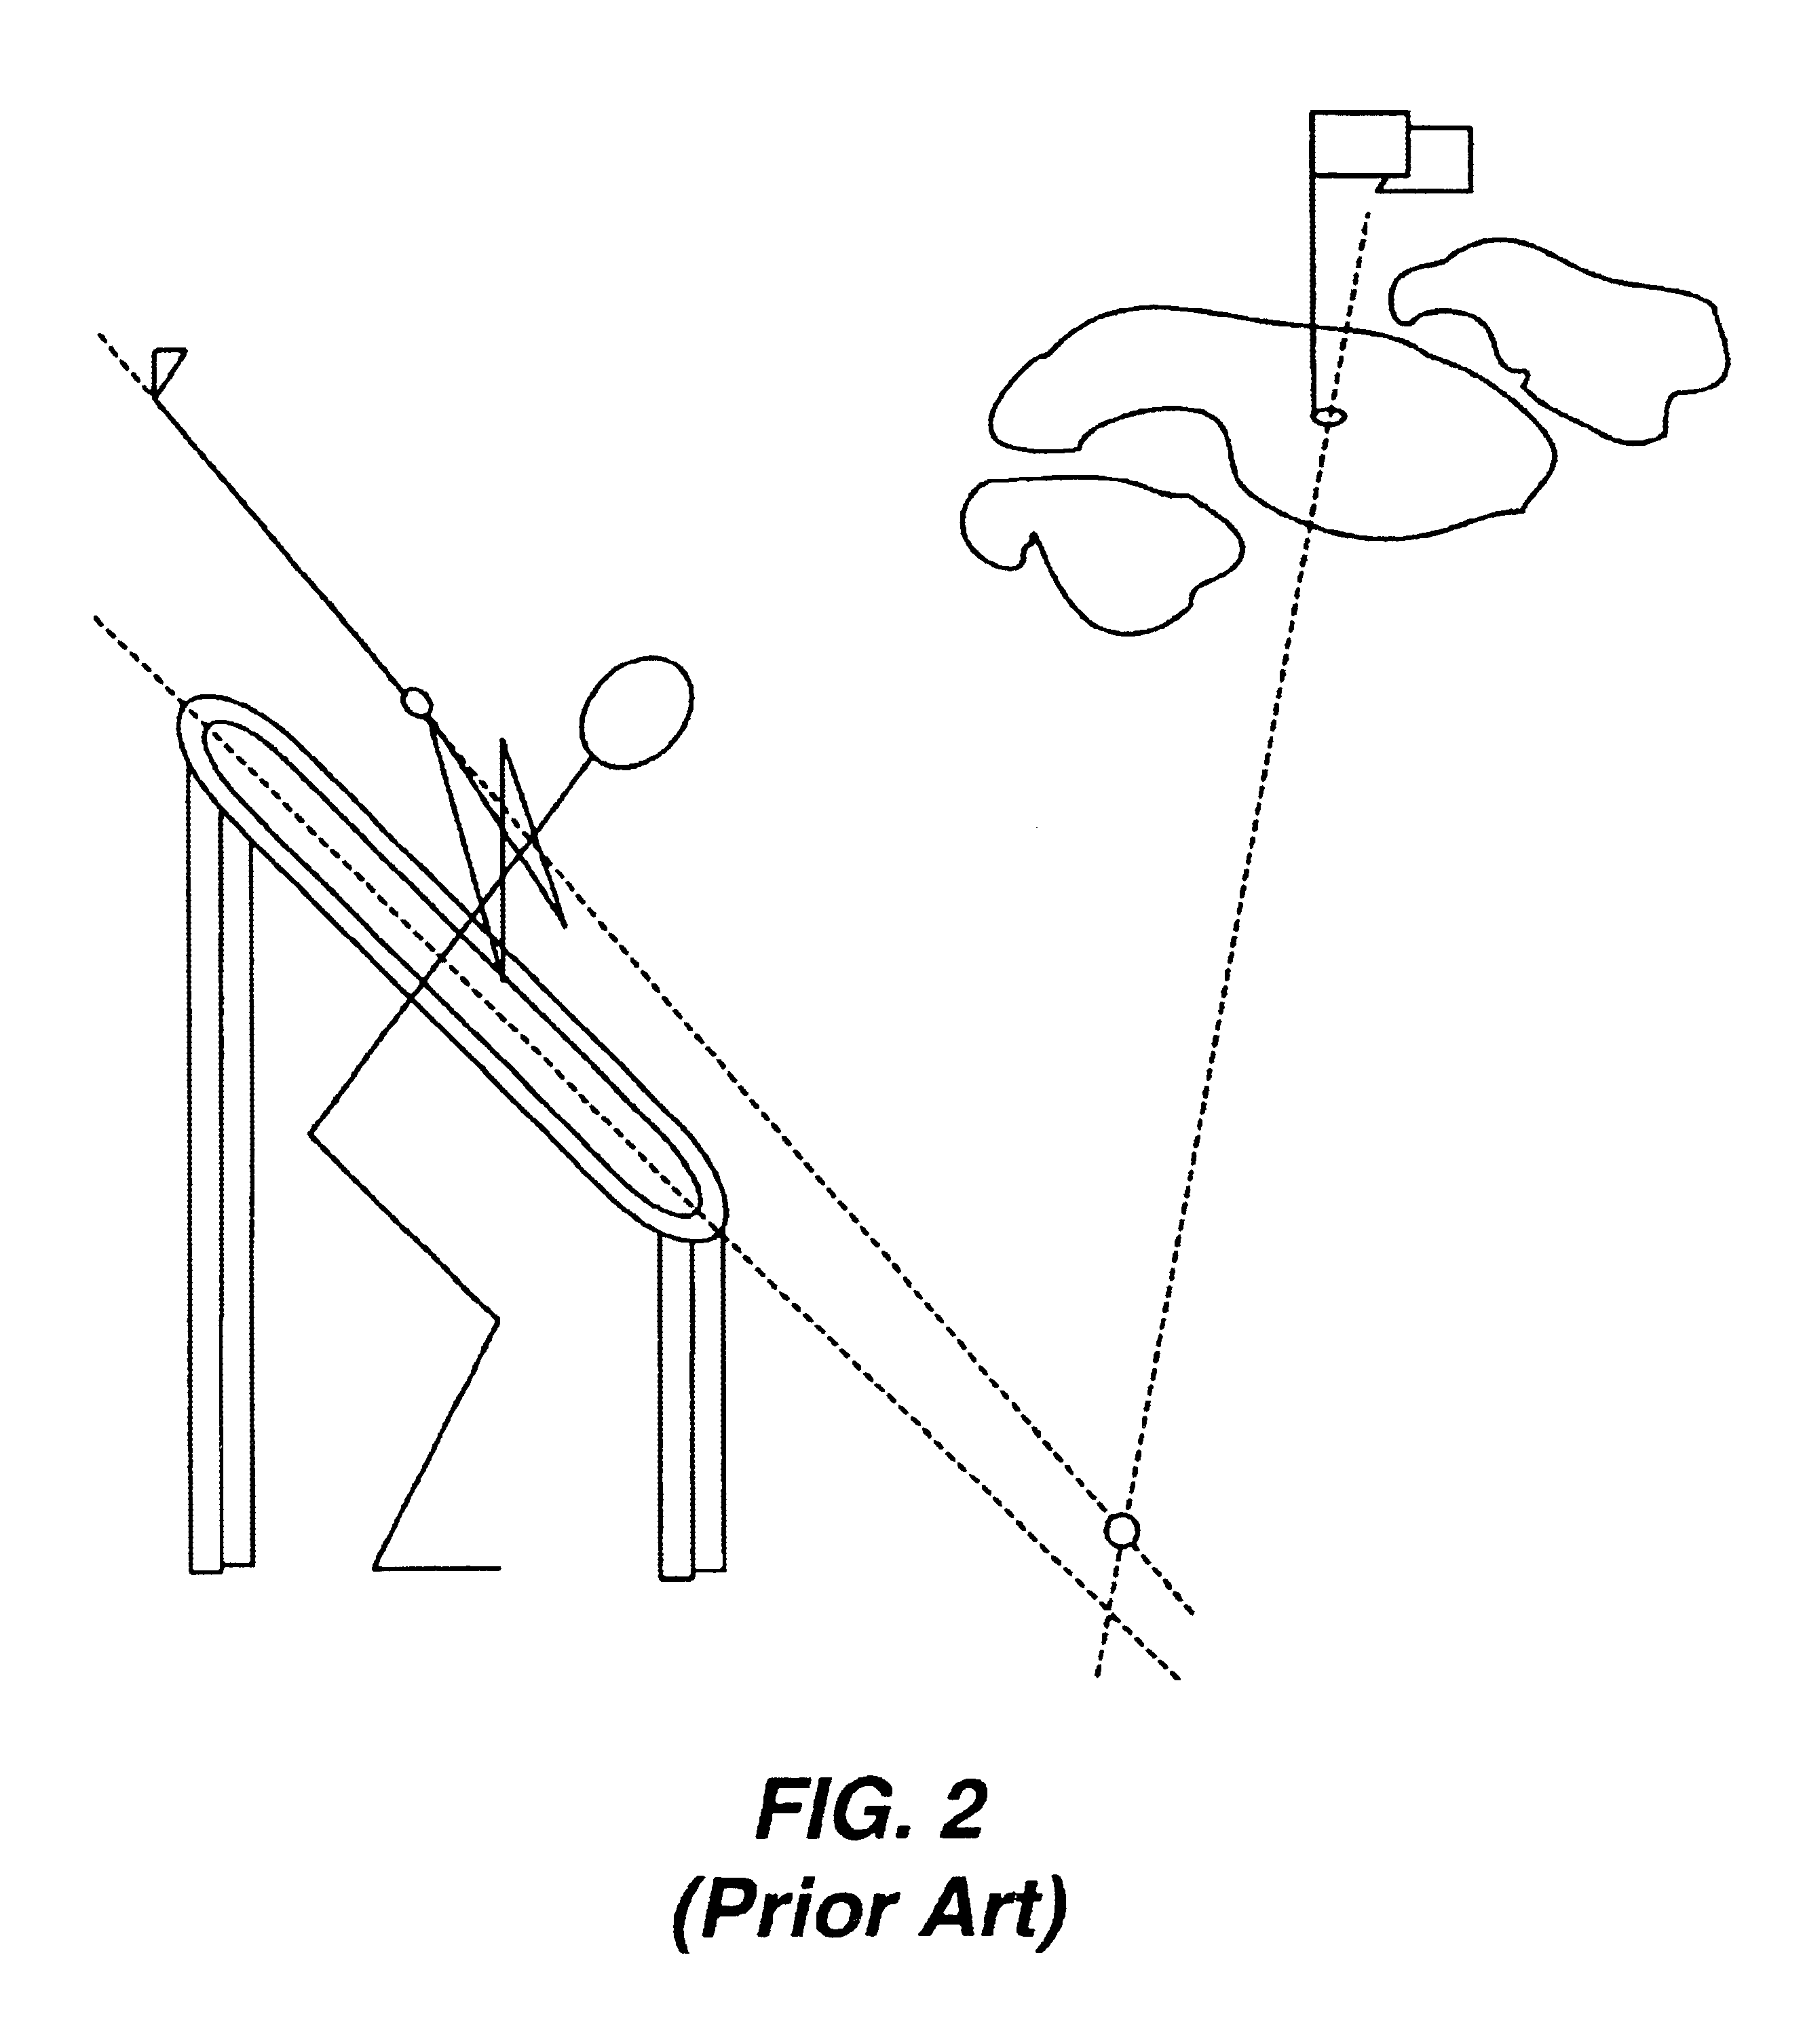 Ergonomic motion and athletic activity monitoring and training system and method